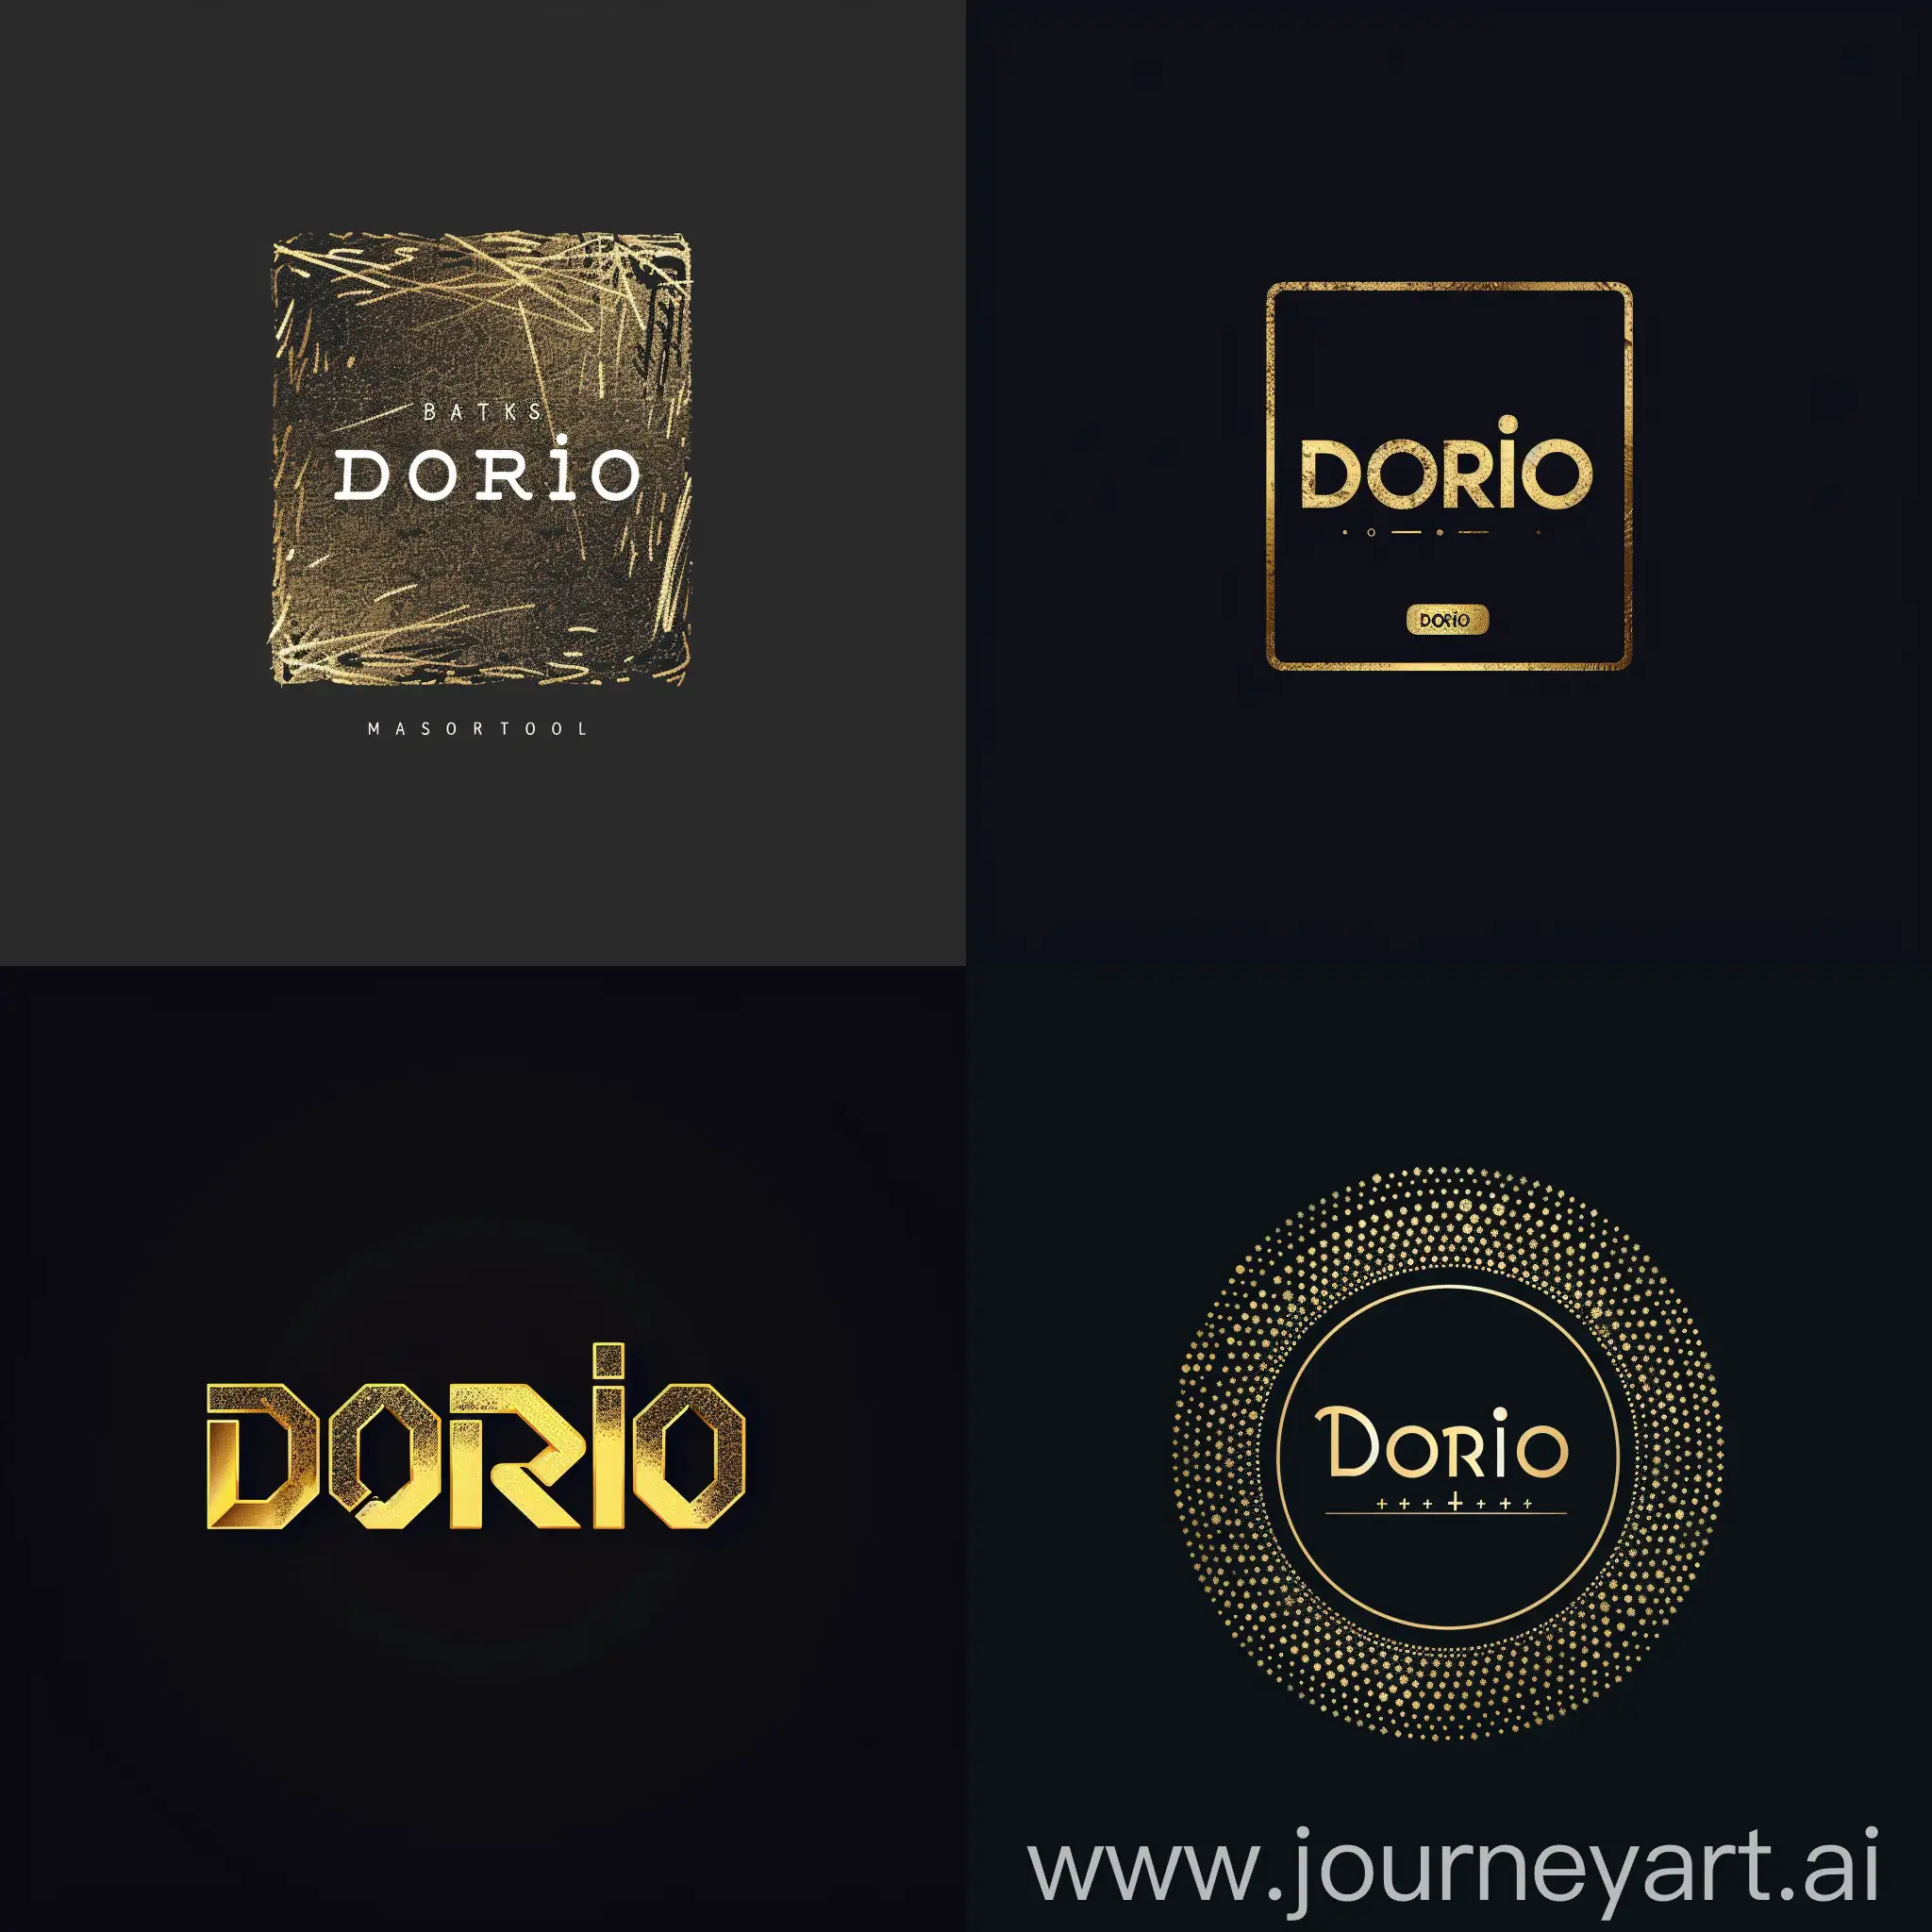 My store's name is Dorio. And I want you to design a logo for it that represents the gold market.